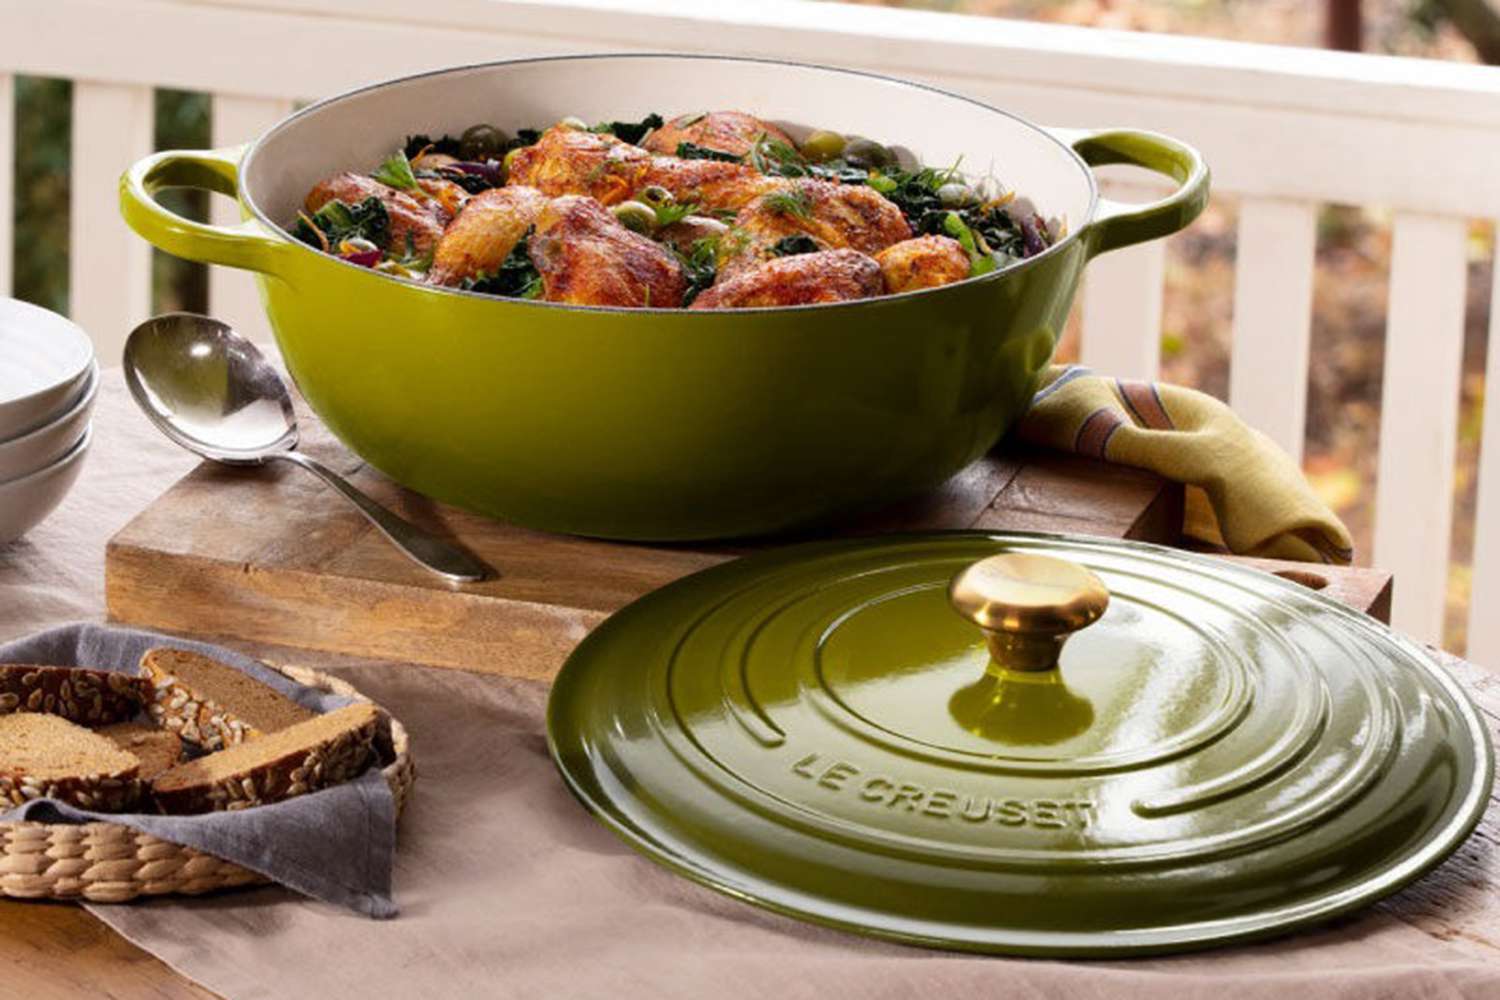 I don't know much about Le Creuset but supposedly they're on sale - 50% off  deals. Thought I'd tell y'all : r/castiron